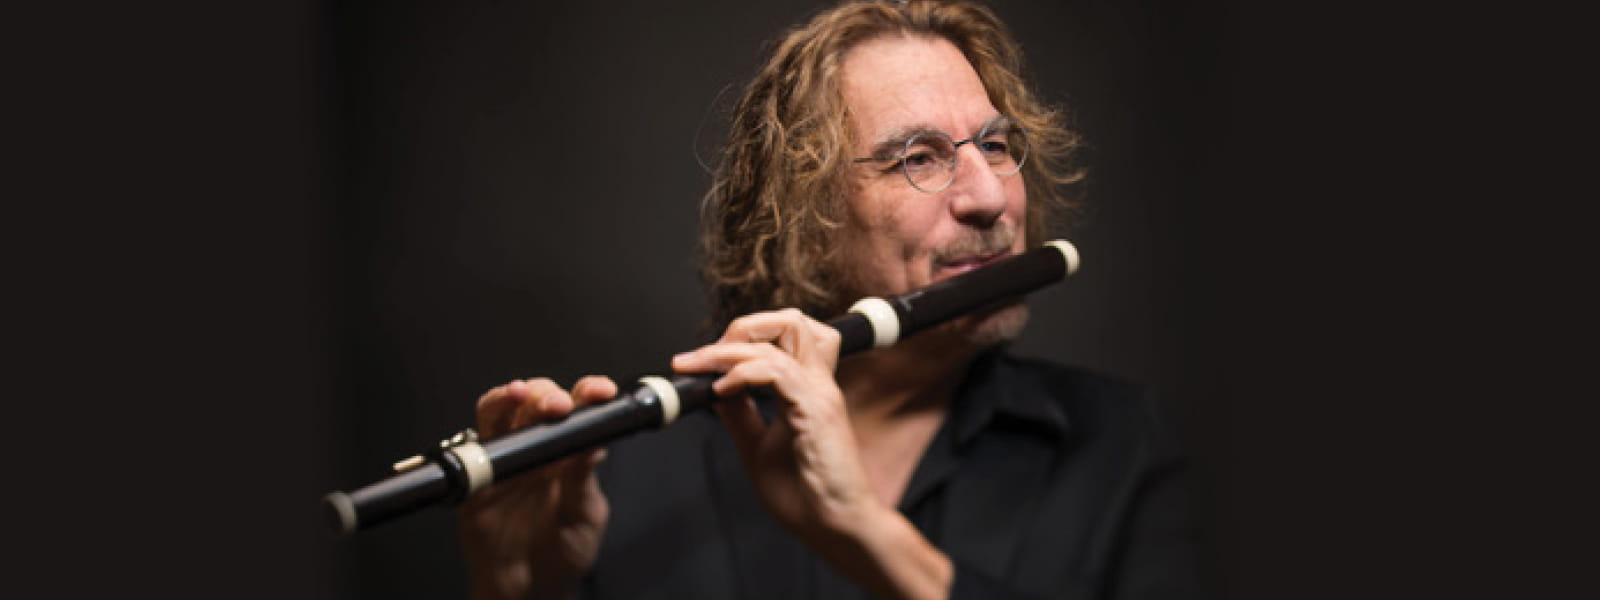 Stephen Schultz playing the flute